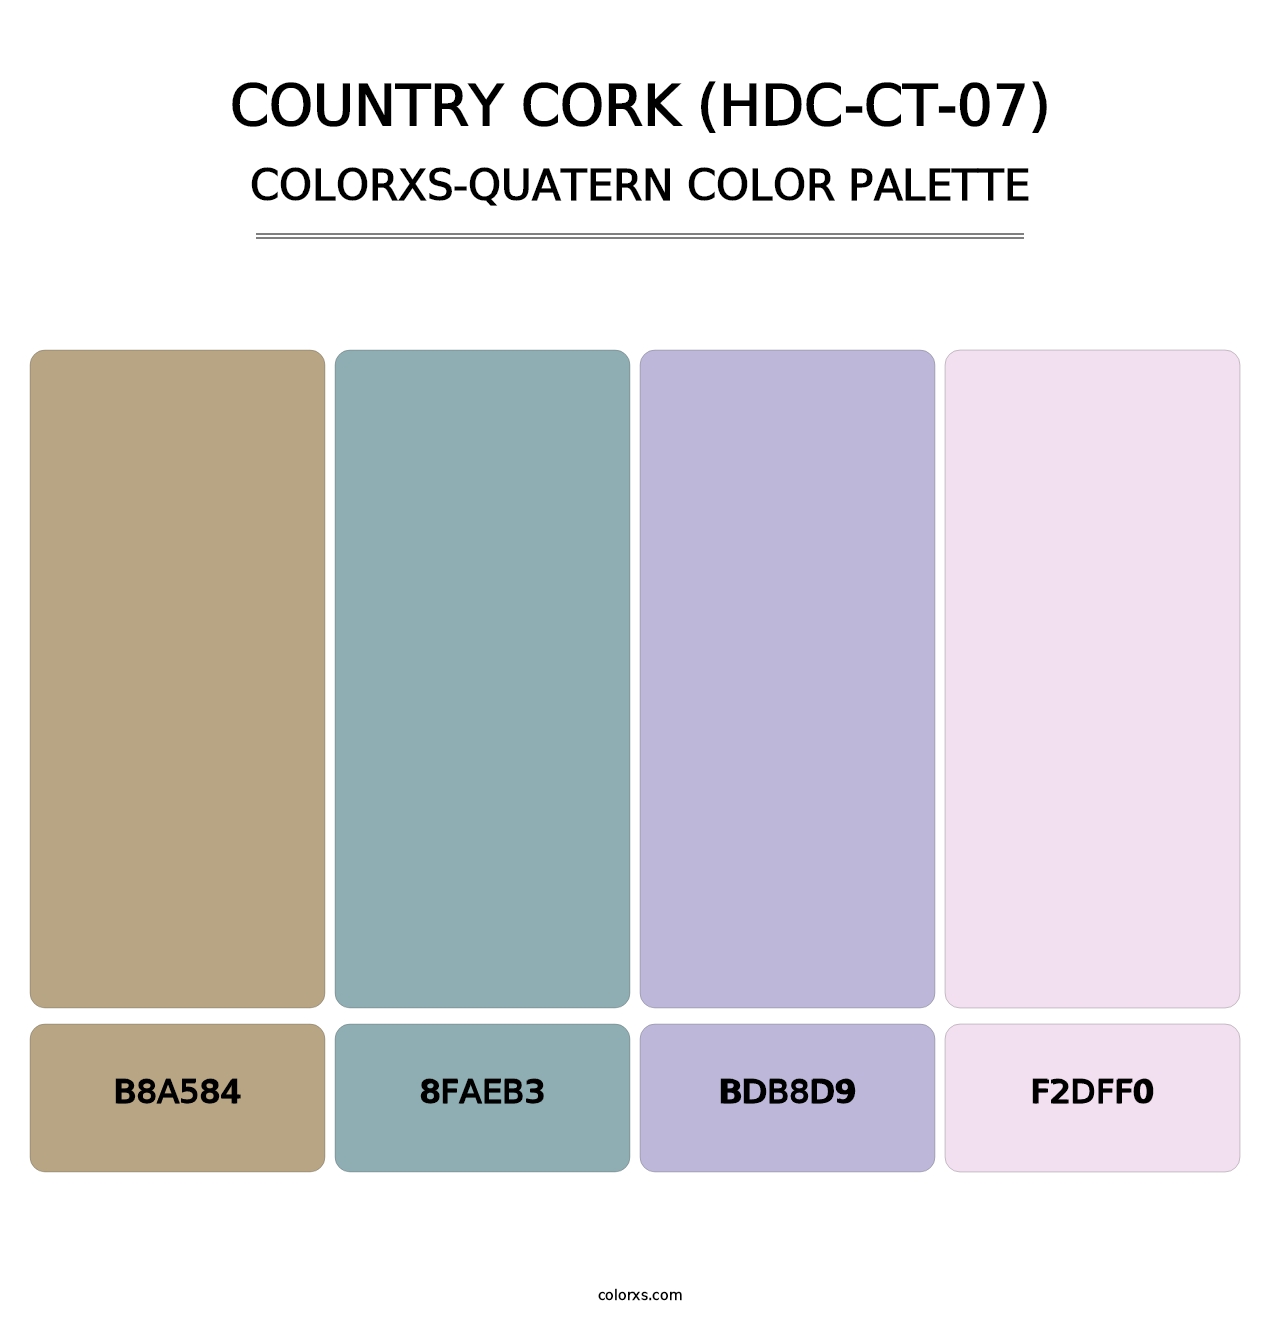 Country Cork (HDC-CT-07) - Colorxs Quatern Palette